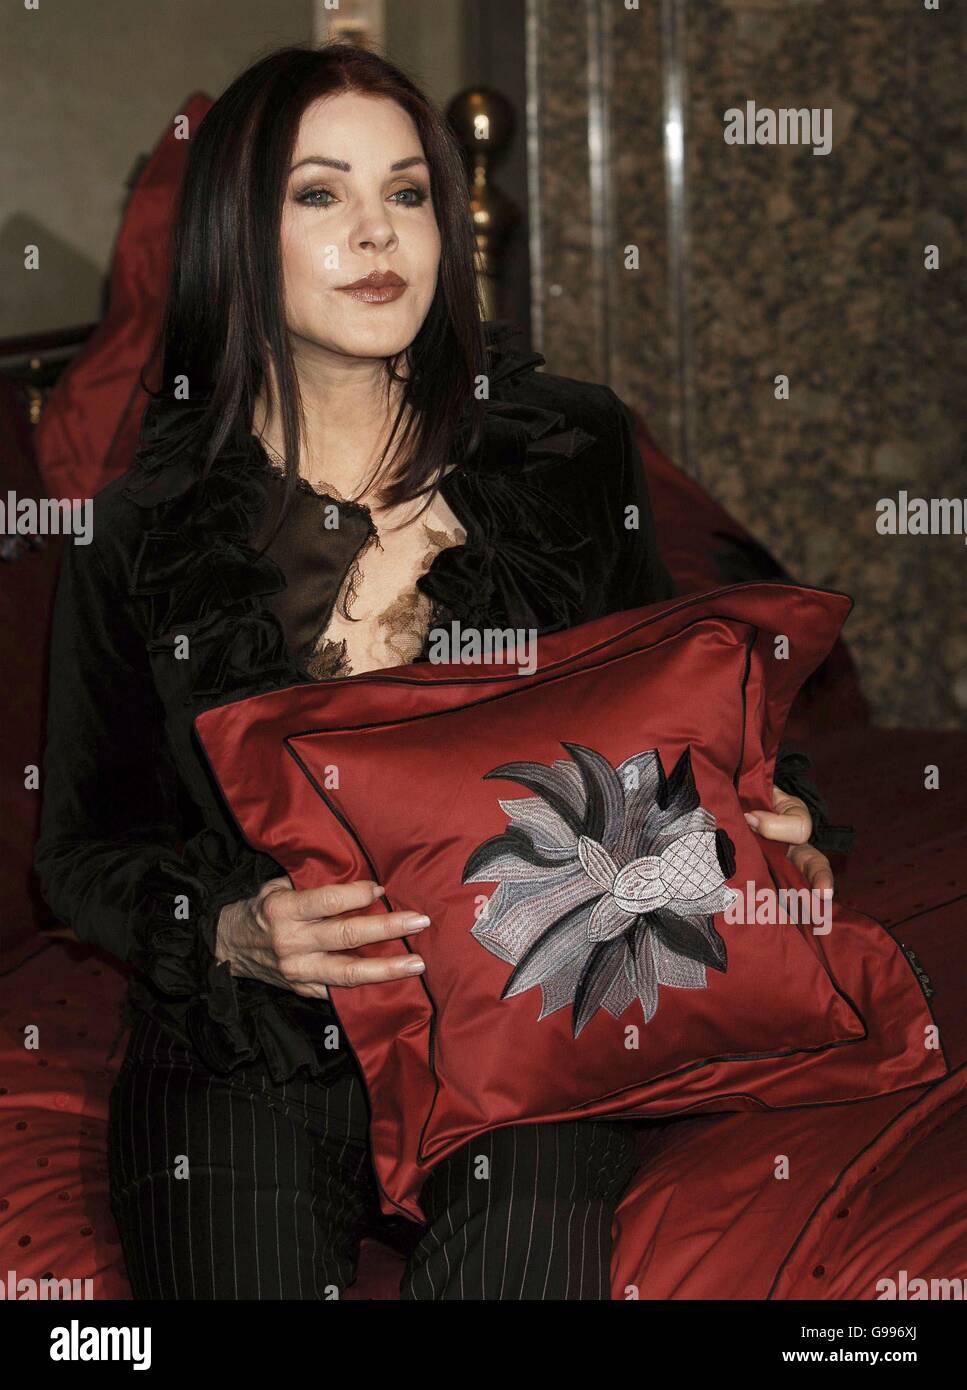 Priscilla Presley at a photocall for the launch of her bed linen collection, at Harrods in Knightsbridge, west London, Wednesday 5 April 2006. PRESS ASSOCIATION PHOTO. Photo credit should read:Yui Mok/PA Stock Photo